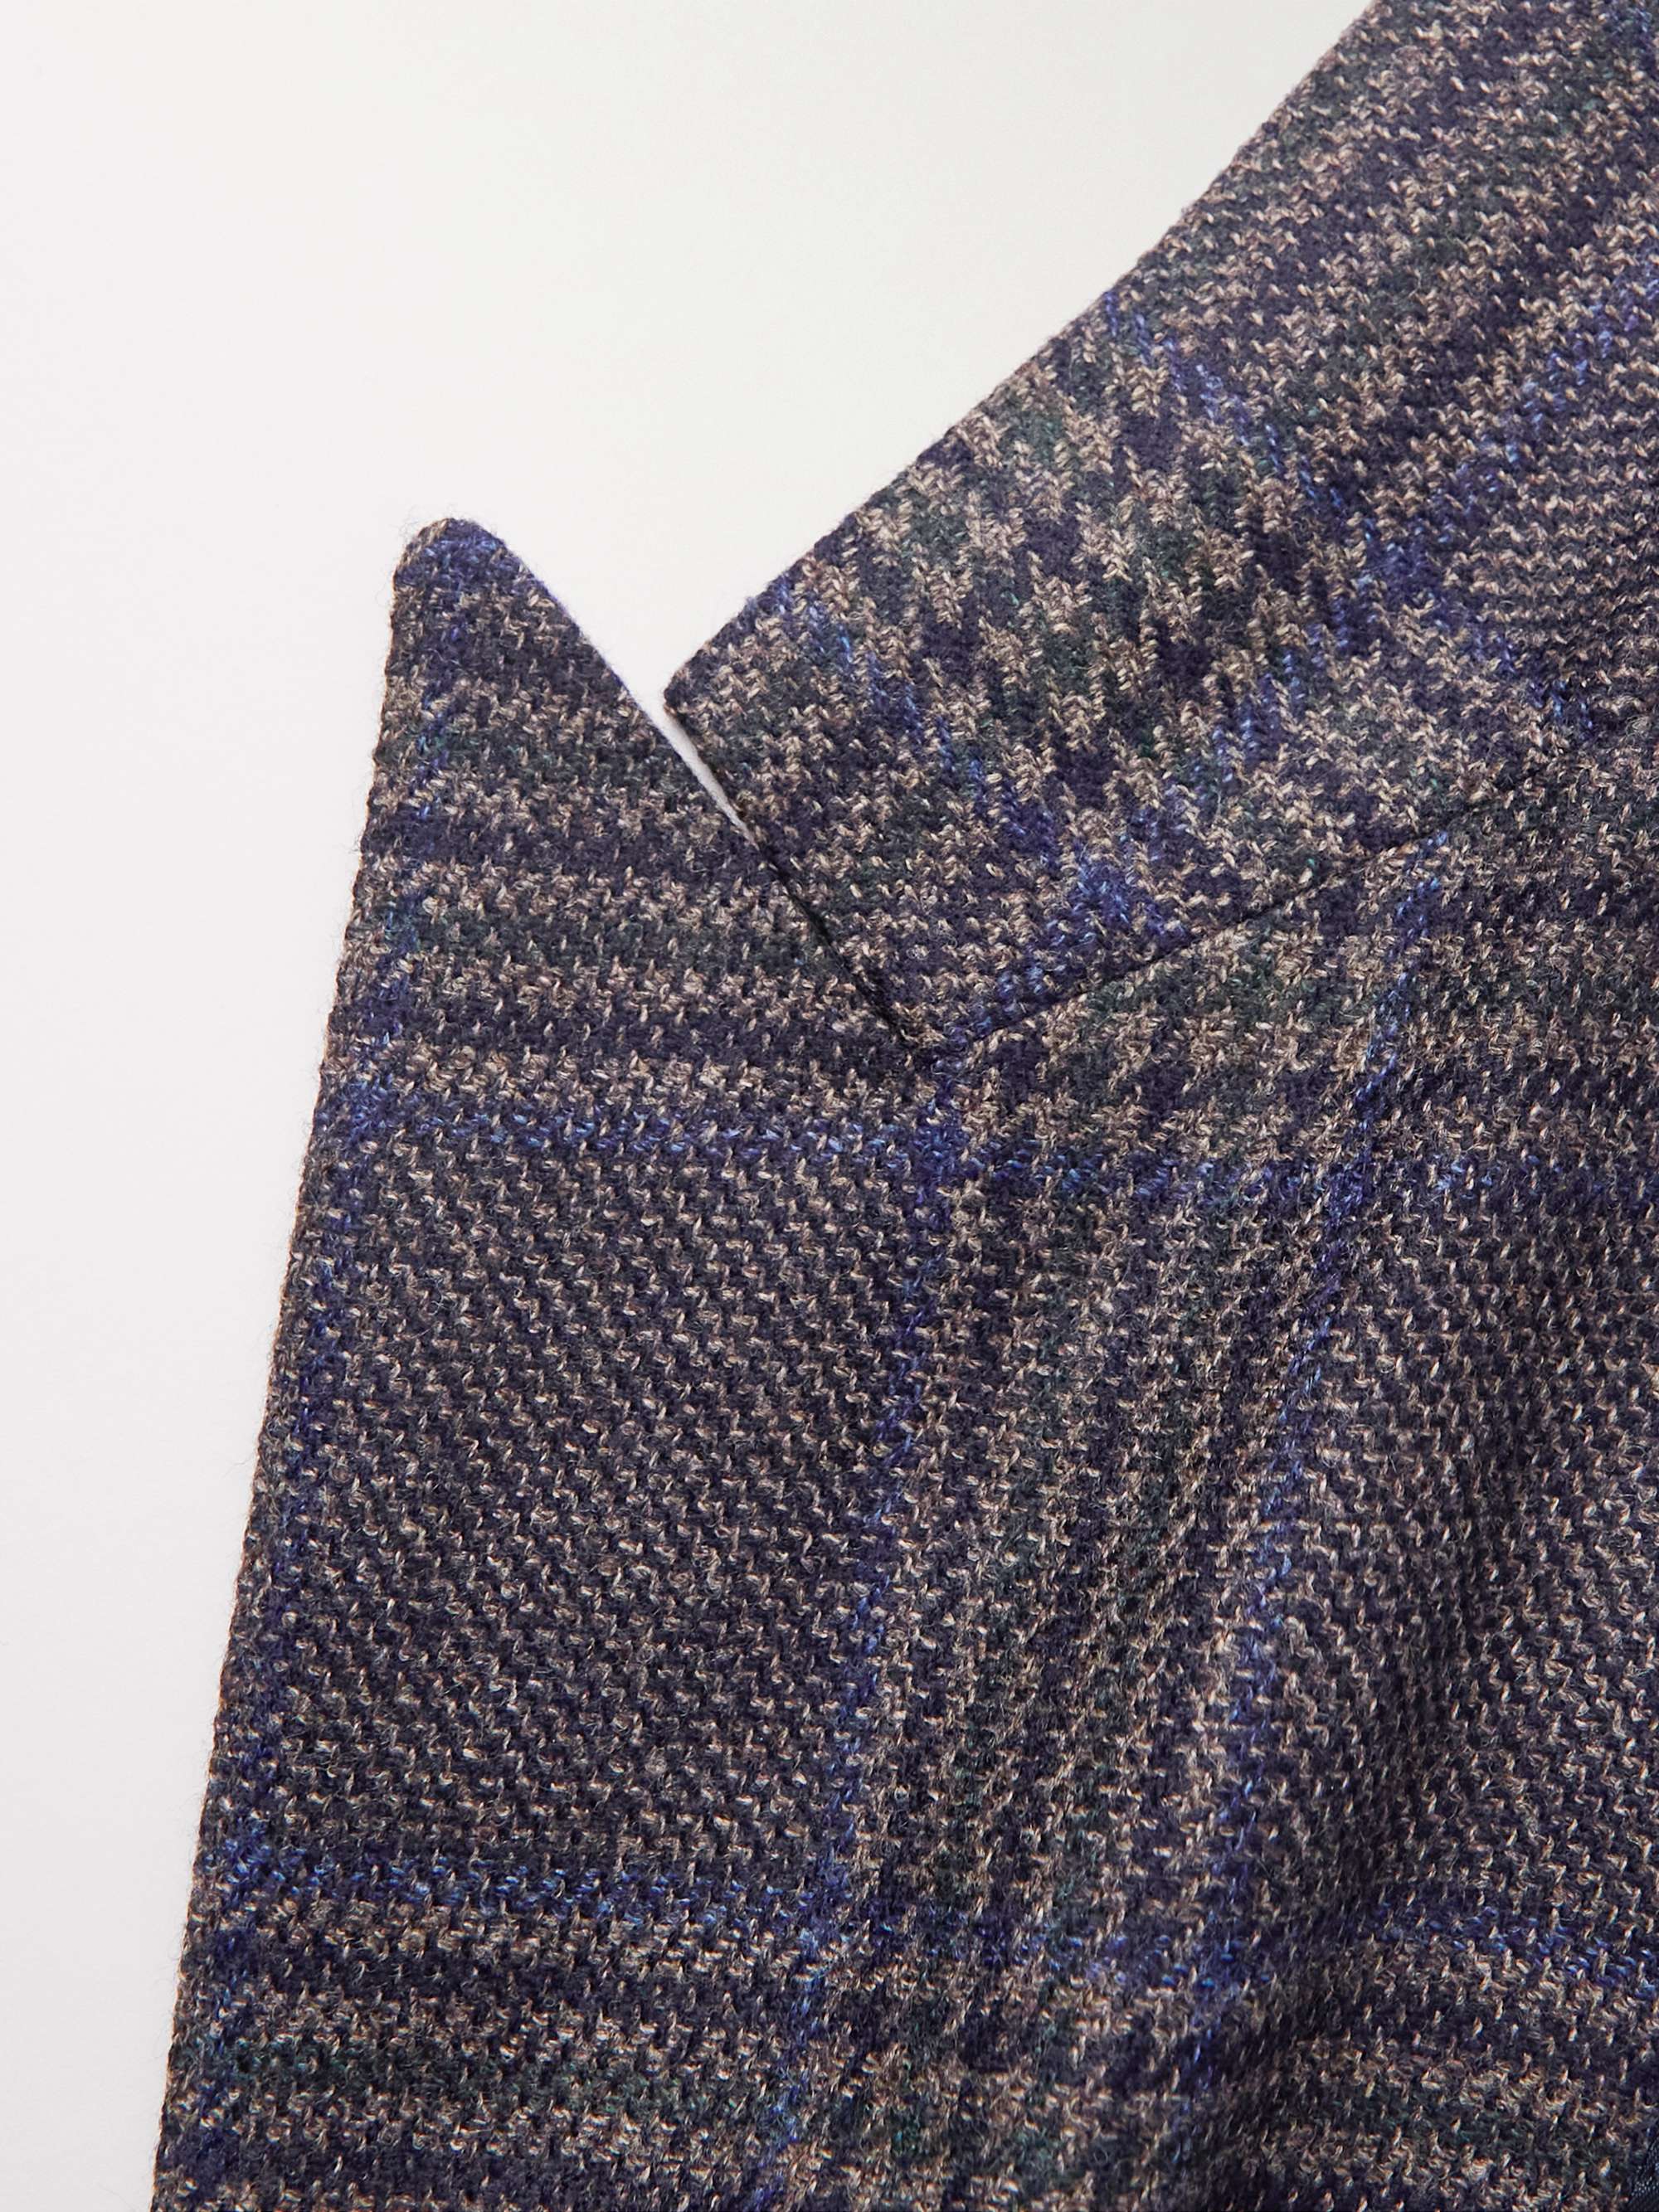 THOM SWEENEY Prince of Wales Checked Wool and Silk-Blend Blazer